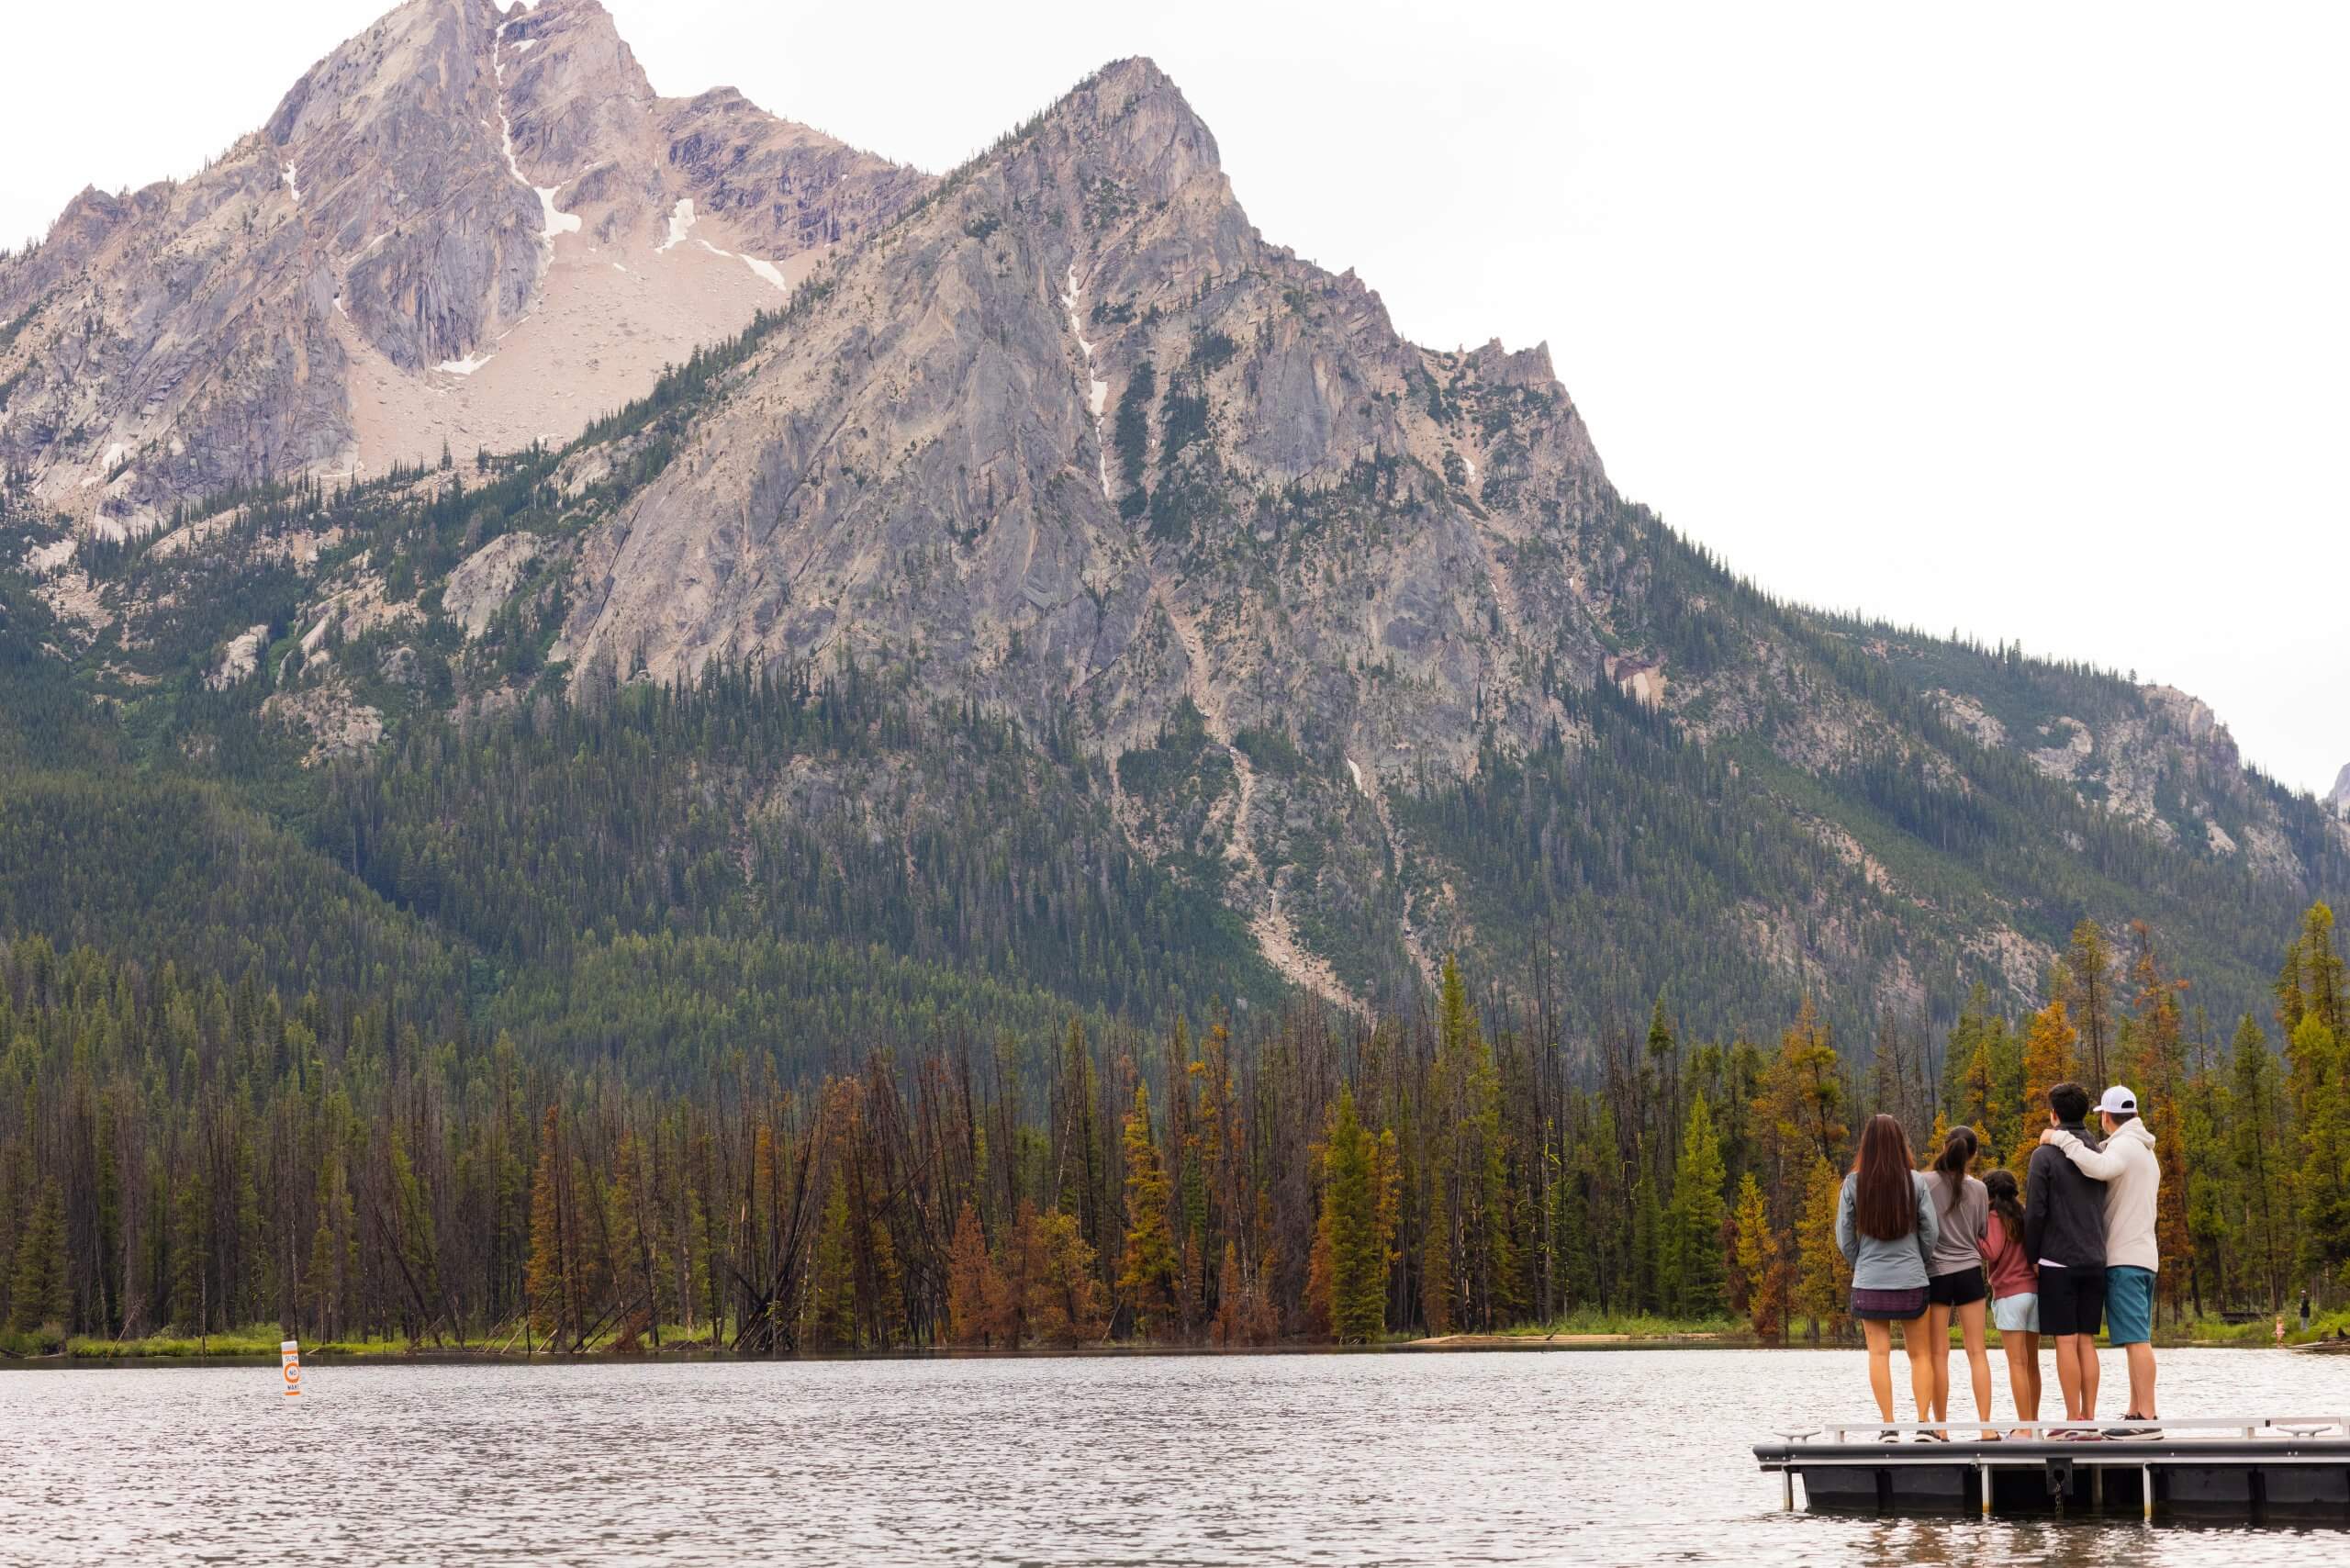 a group of people standing on a dock overlooking Stanley Lake with a forest of trees and mountains in the background